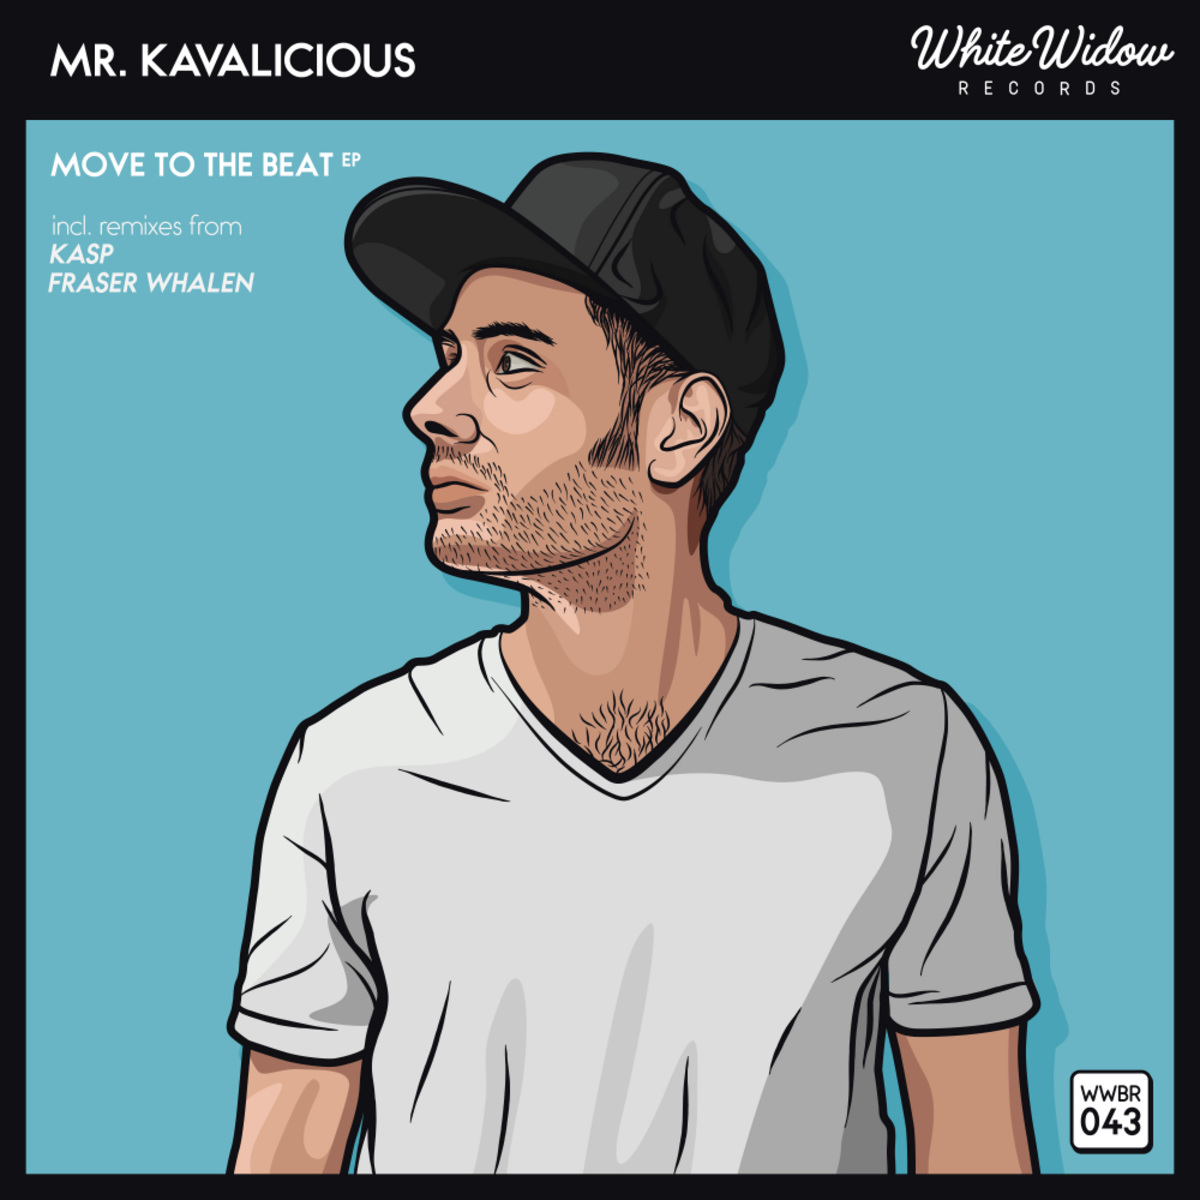 Mr. Kavalicious - Move To The Beat / White Widow Records